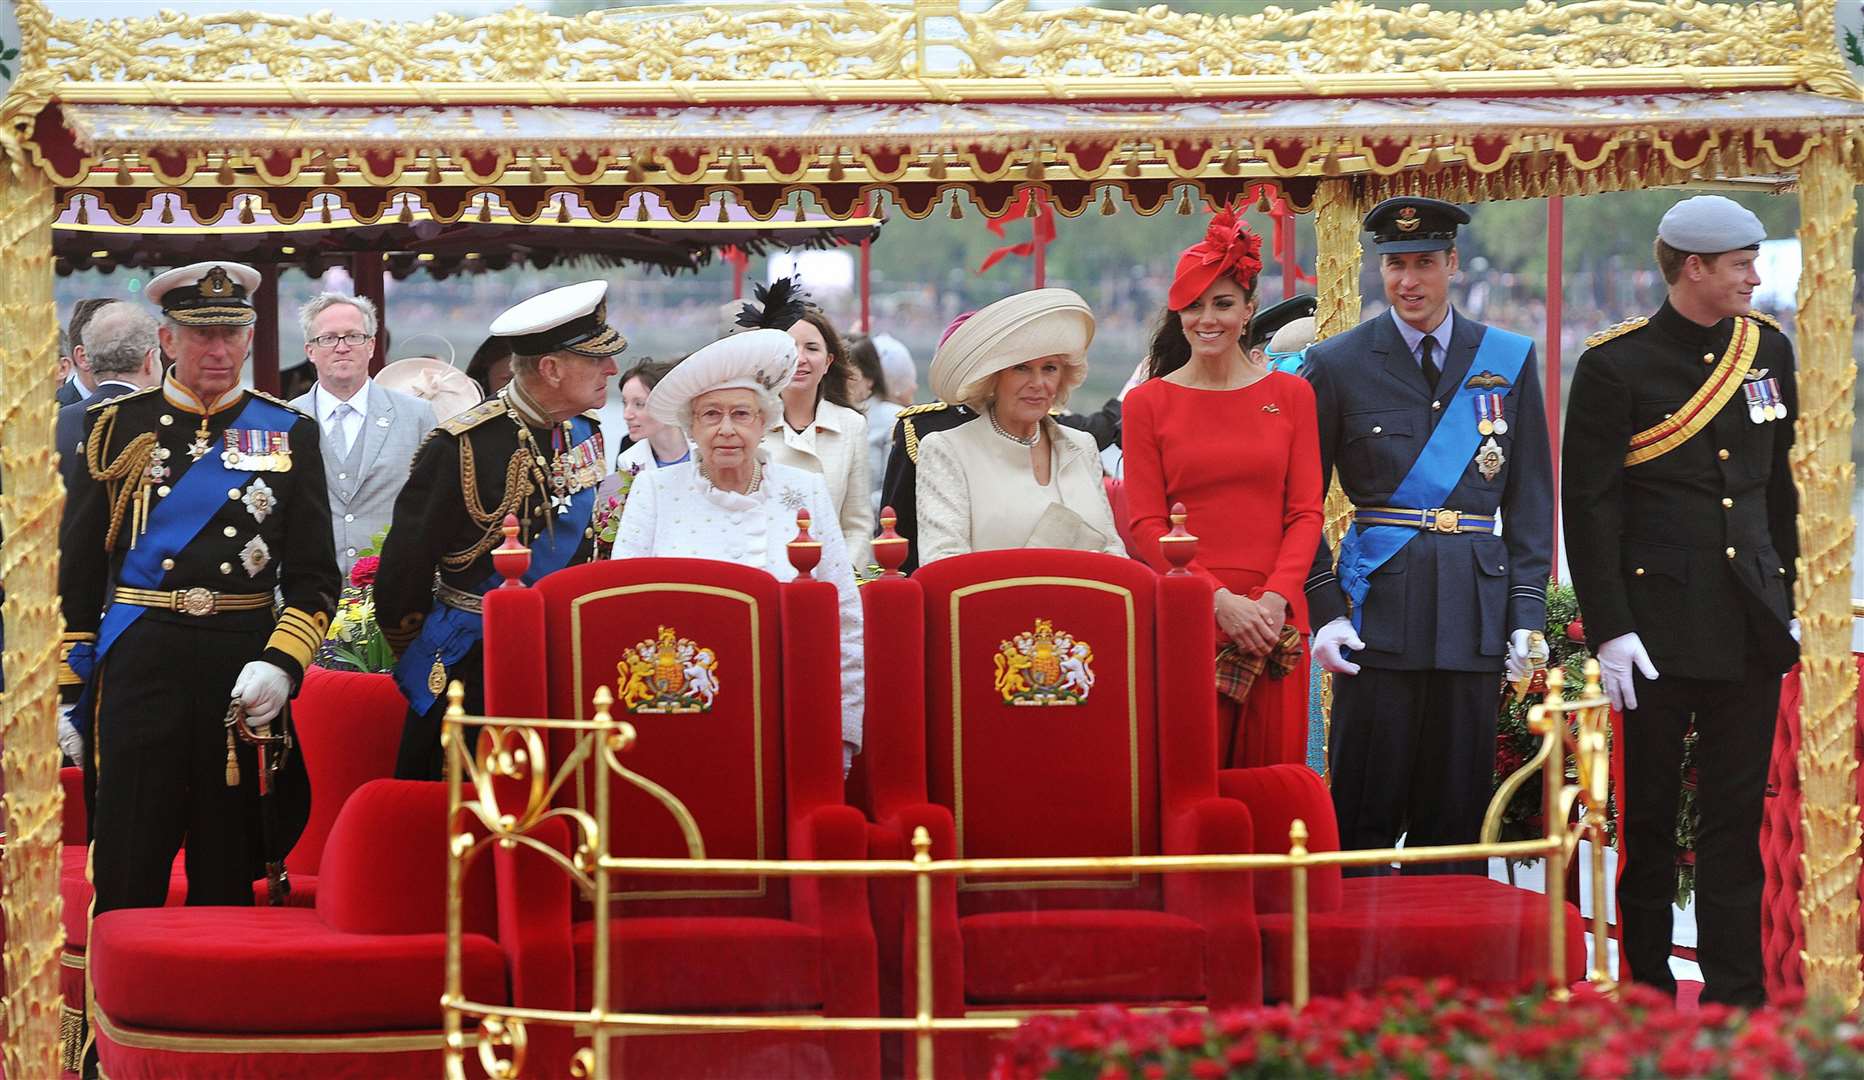 Members of the Royal family onboard the Spirit of Chartwell during the Diamond Jubilee River Pageant (John Stillwell/PA)